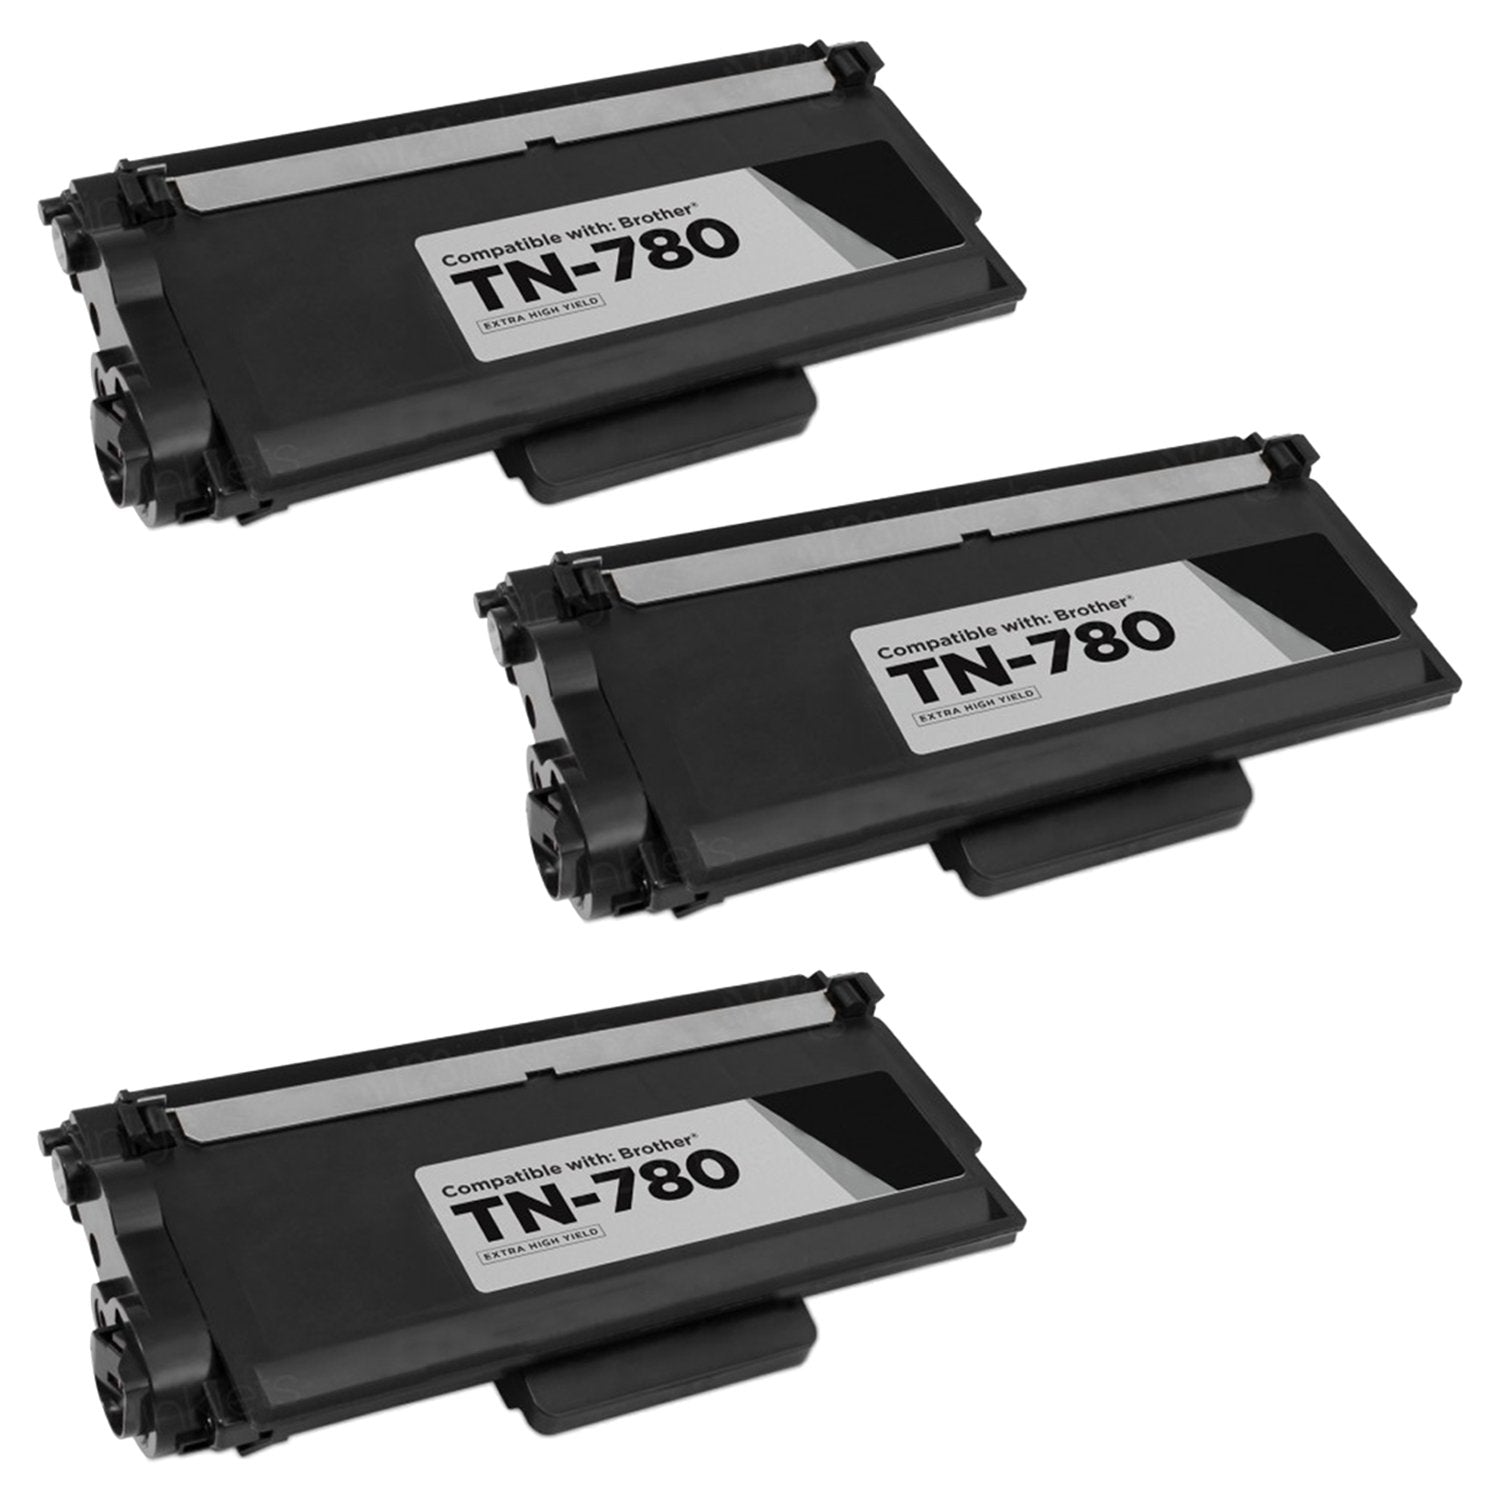 Absolute Toner Compatible Brother TN780 Black Toner Cartridge | Absolute Toner Brother Toner Cartridges